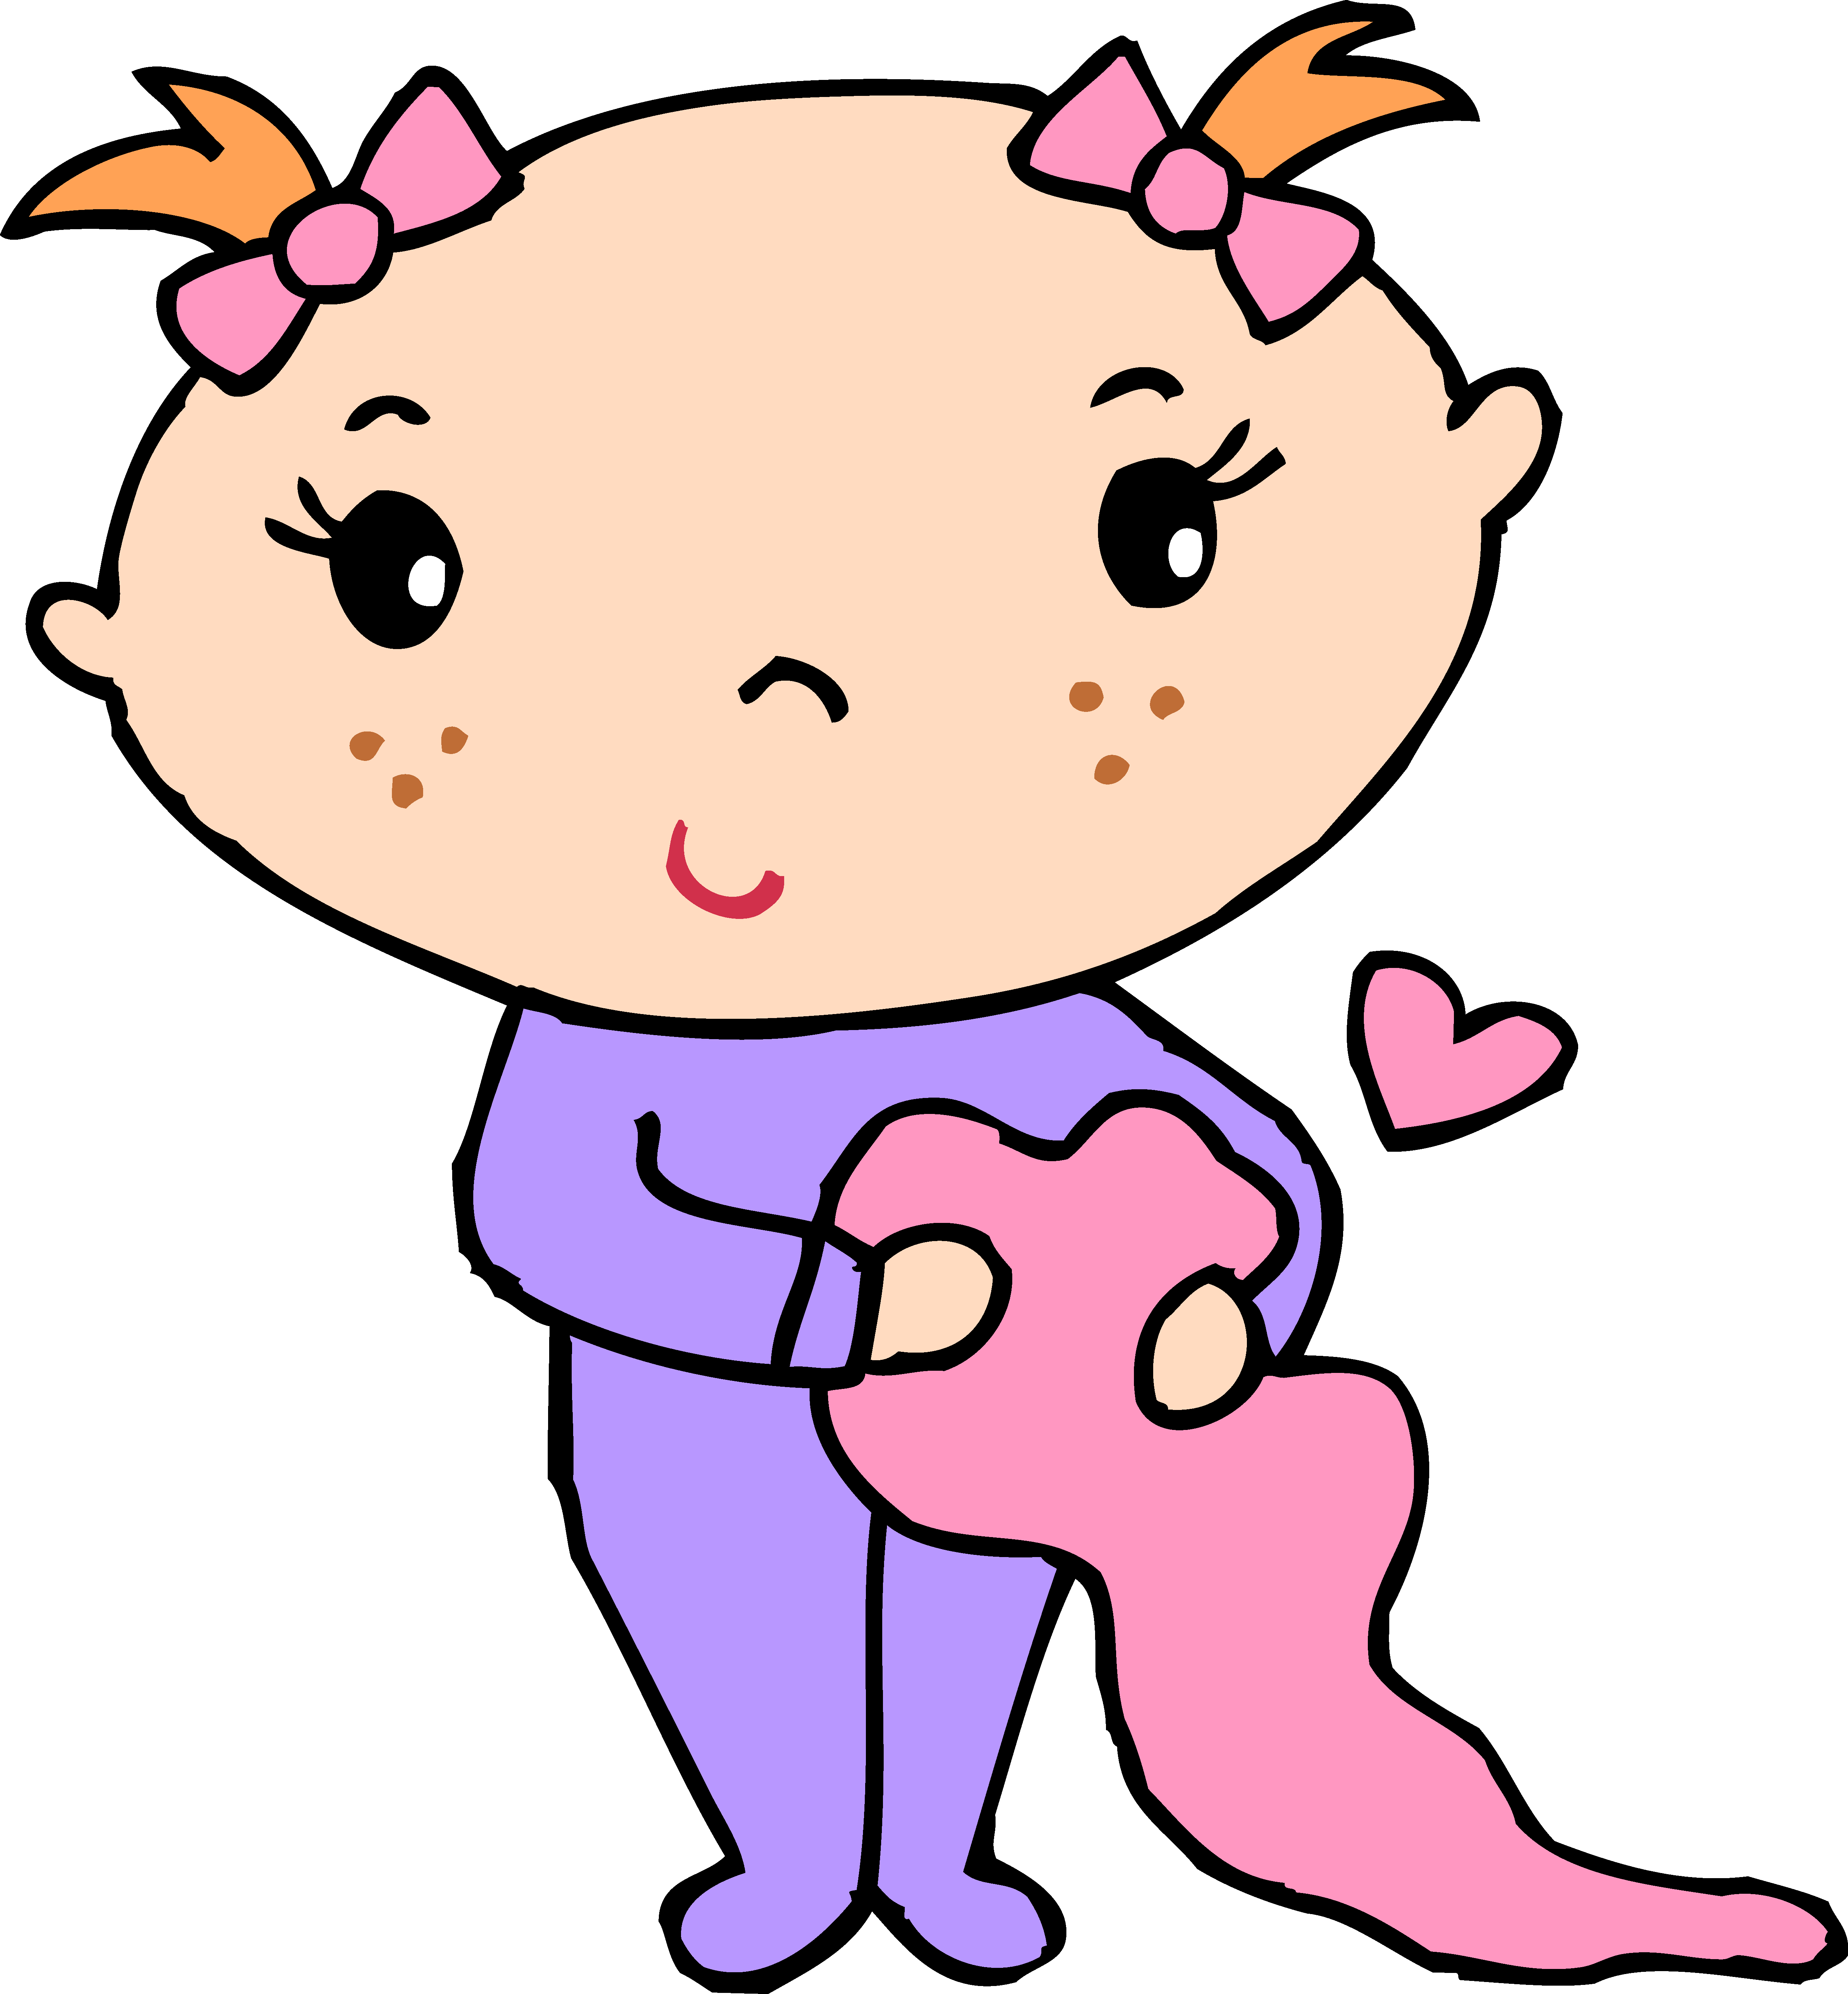 Baby girl clip art clipart free clipart microsoft clipart clipartcow